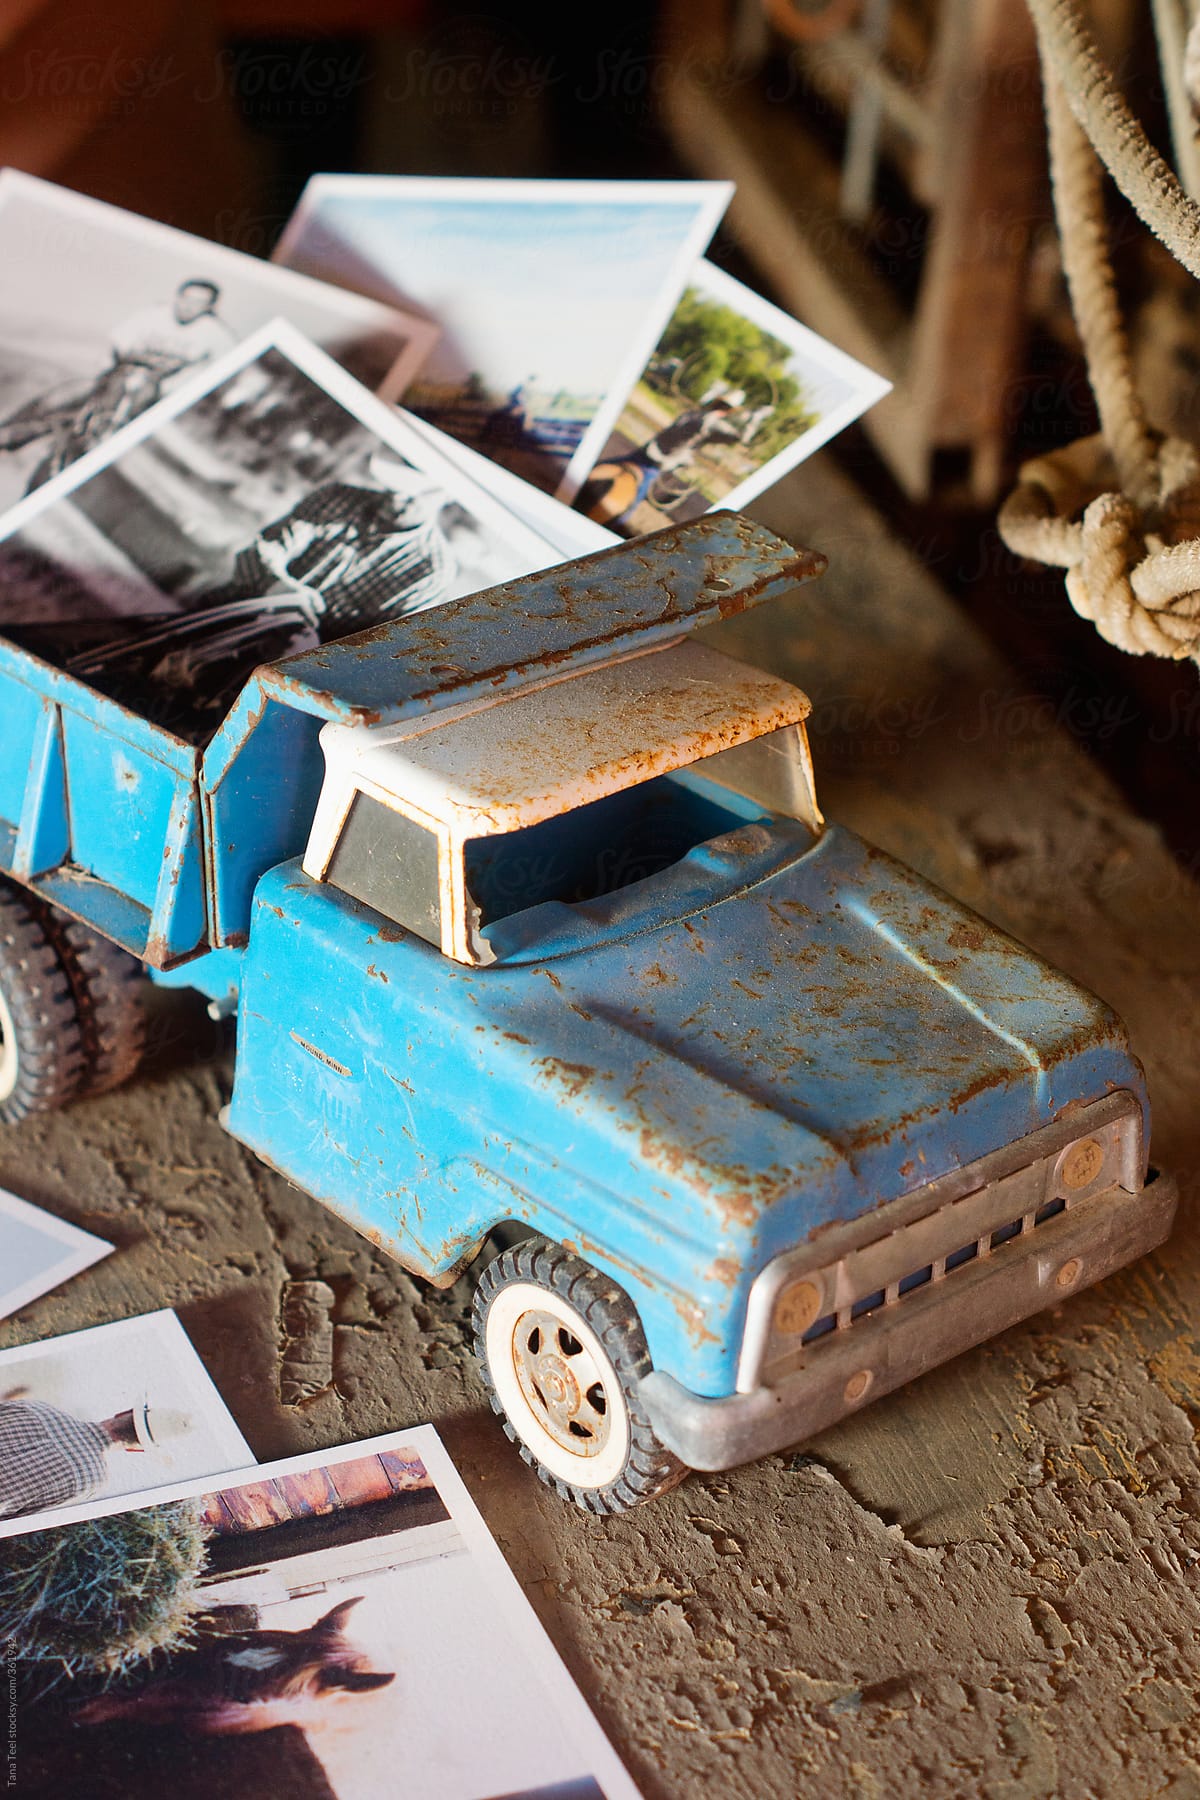 Printed images displayed in an old metal toy pickup on a rustic table